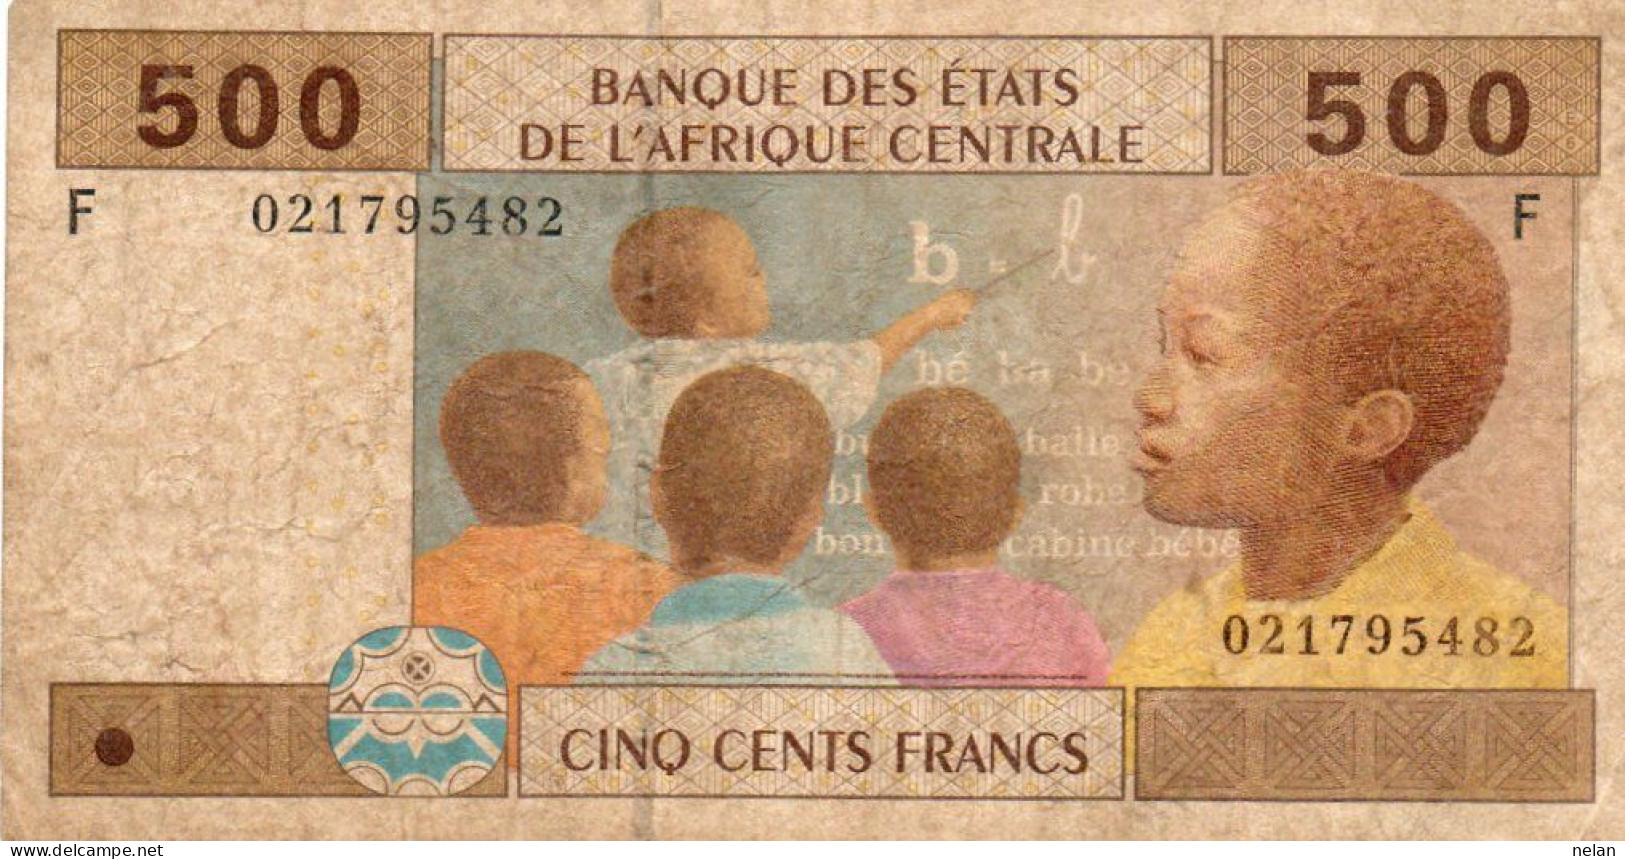 CENTRAL AFRICAN STATES 500 FRANCS 2002 P-506 Fa F For Equatorial Guinea  CIRC. - Central African States